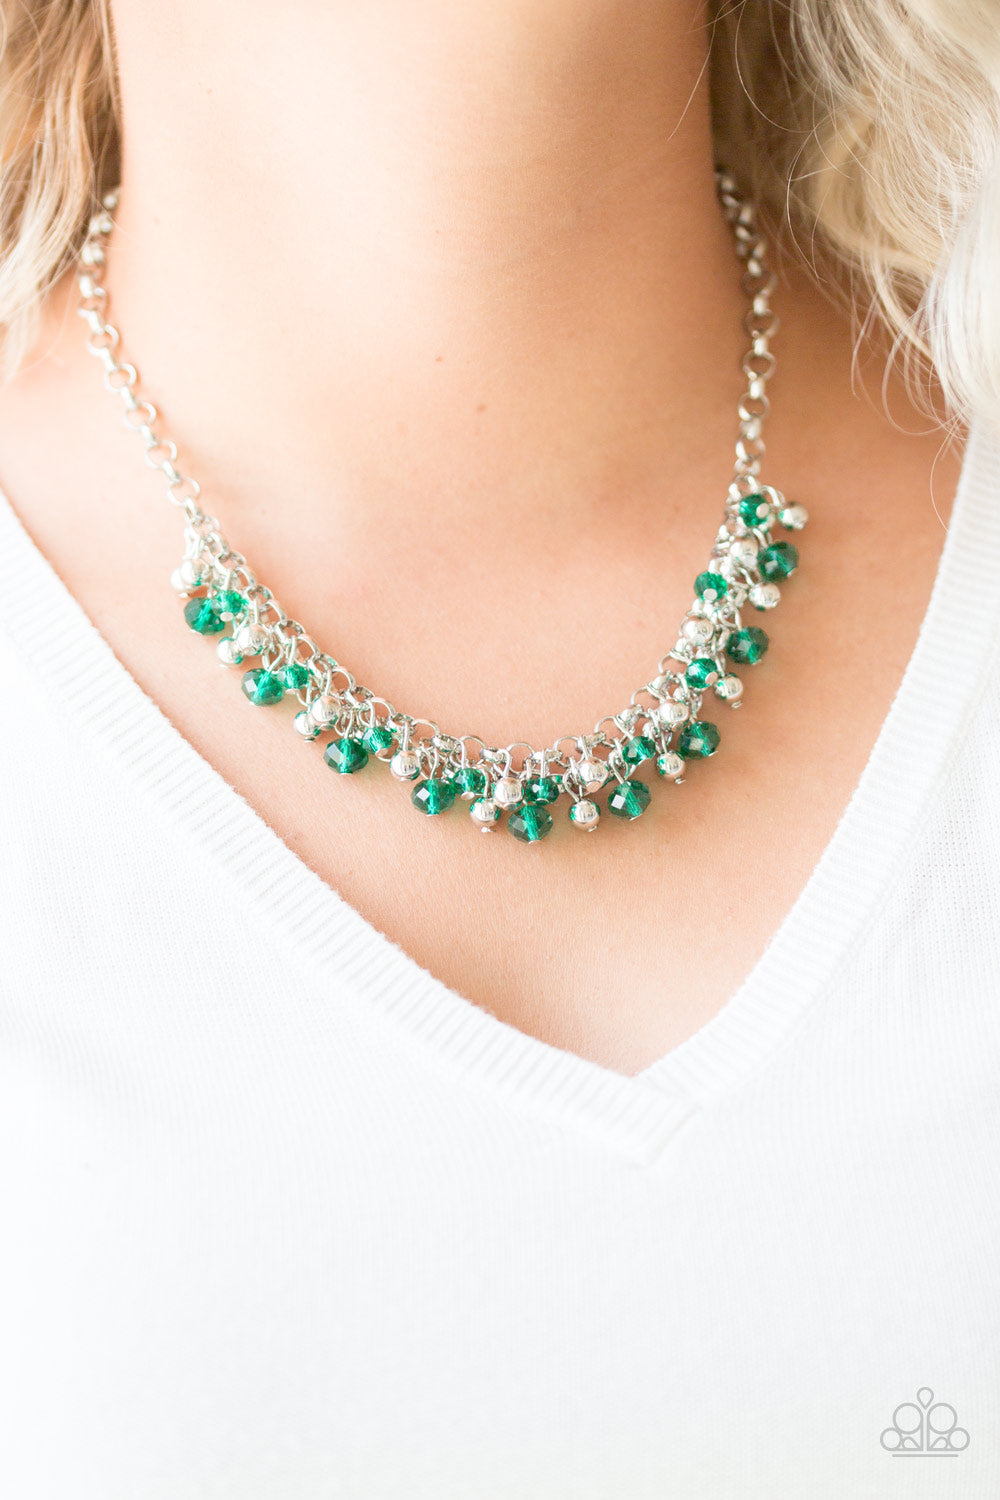 Trust Fund Baby - Green - Necklace - Paparazzi Accessories